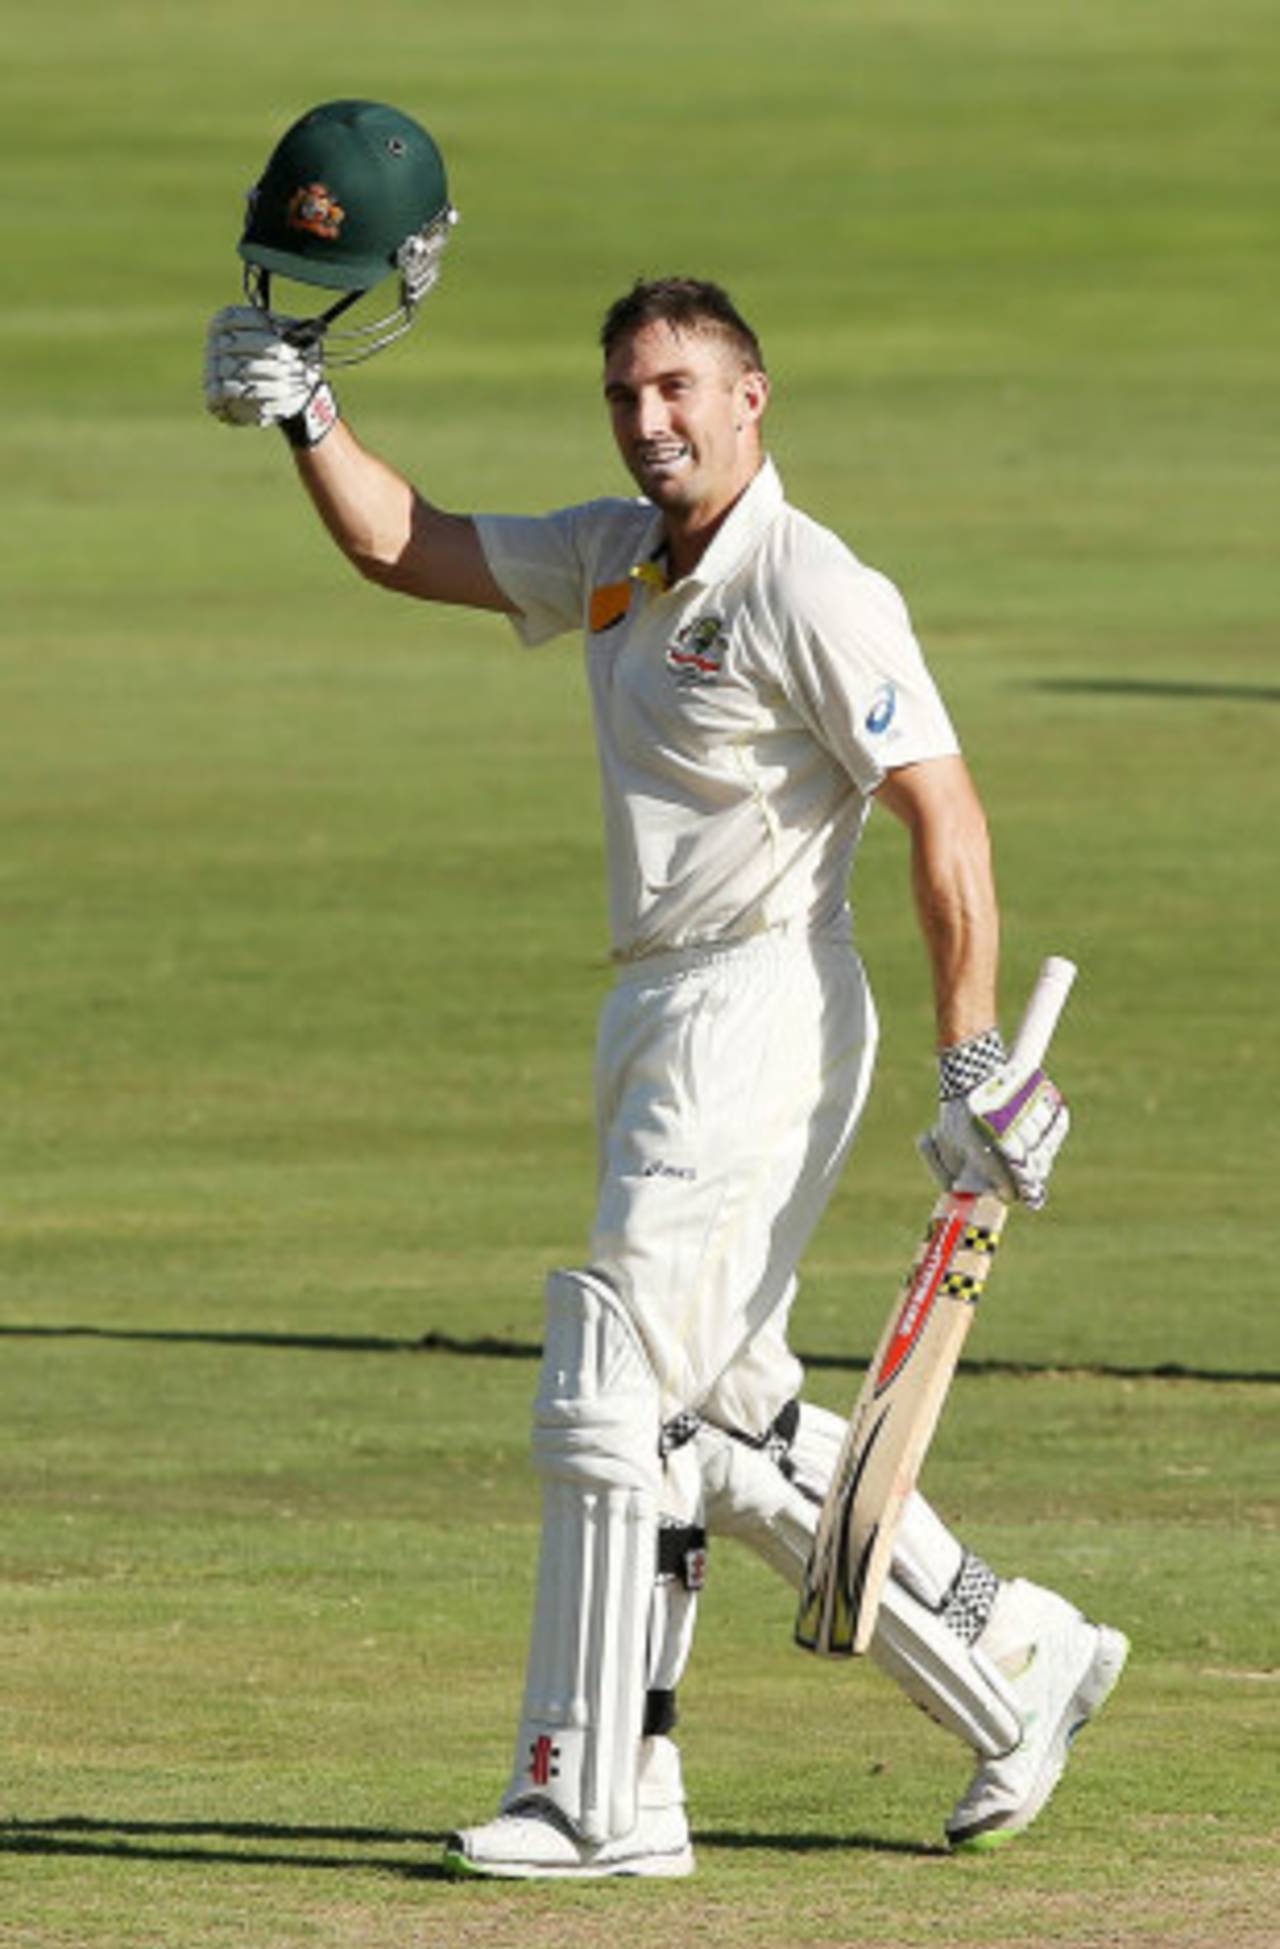 Shaun Marsh made a hundred on his return to the Test team this year but was axed one match later after scoring a pair&nbsp;&nbsp;&bull;&nbsp;&nbsp;Getty Images